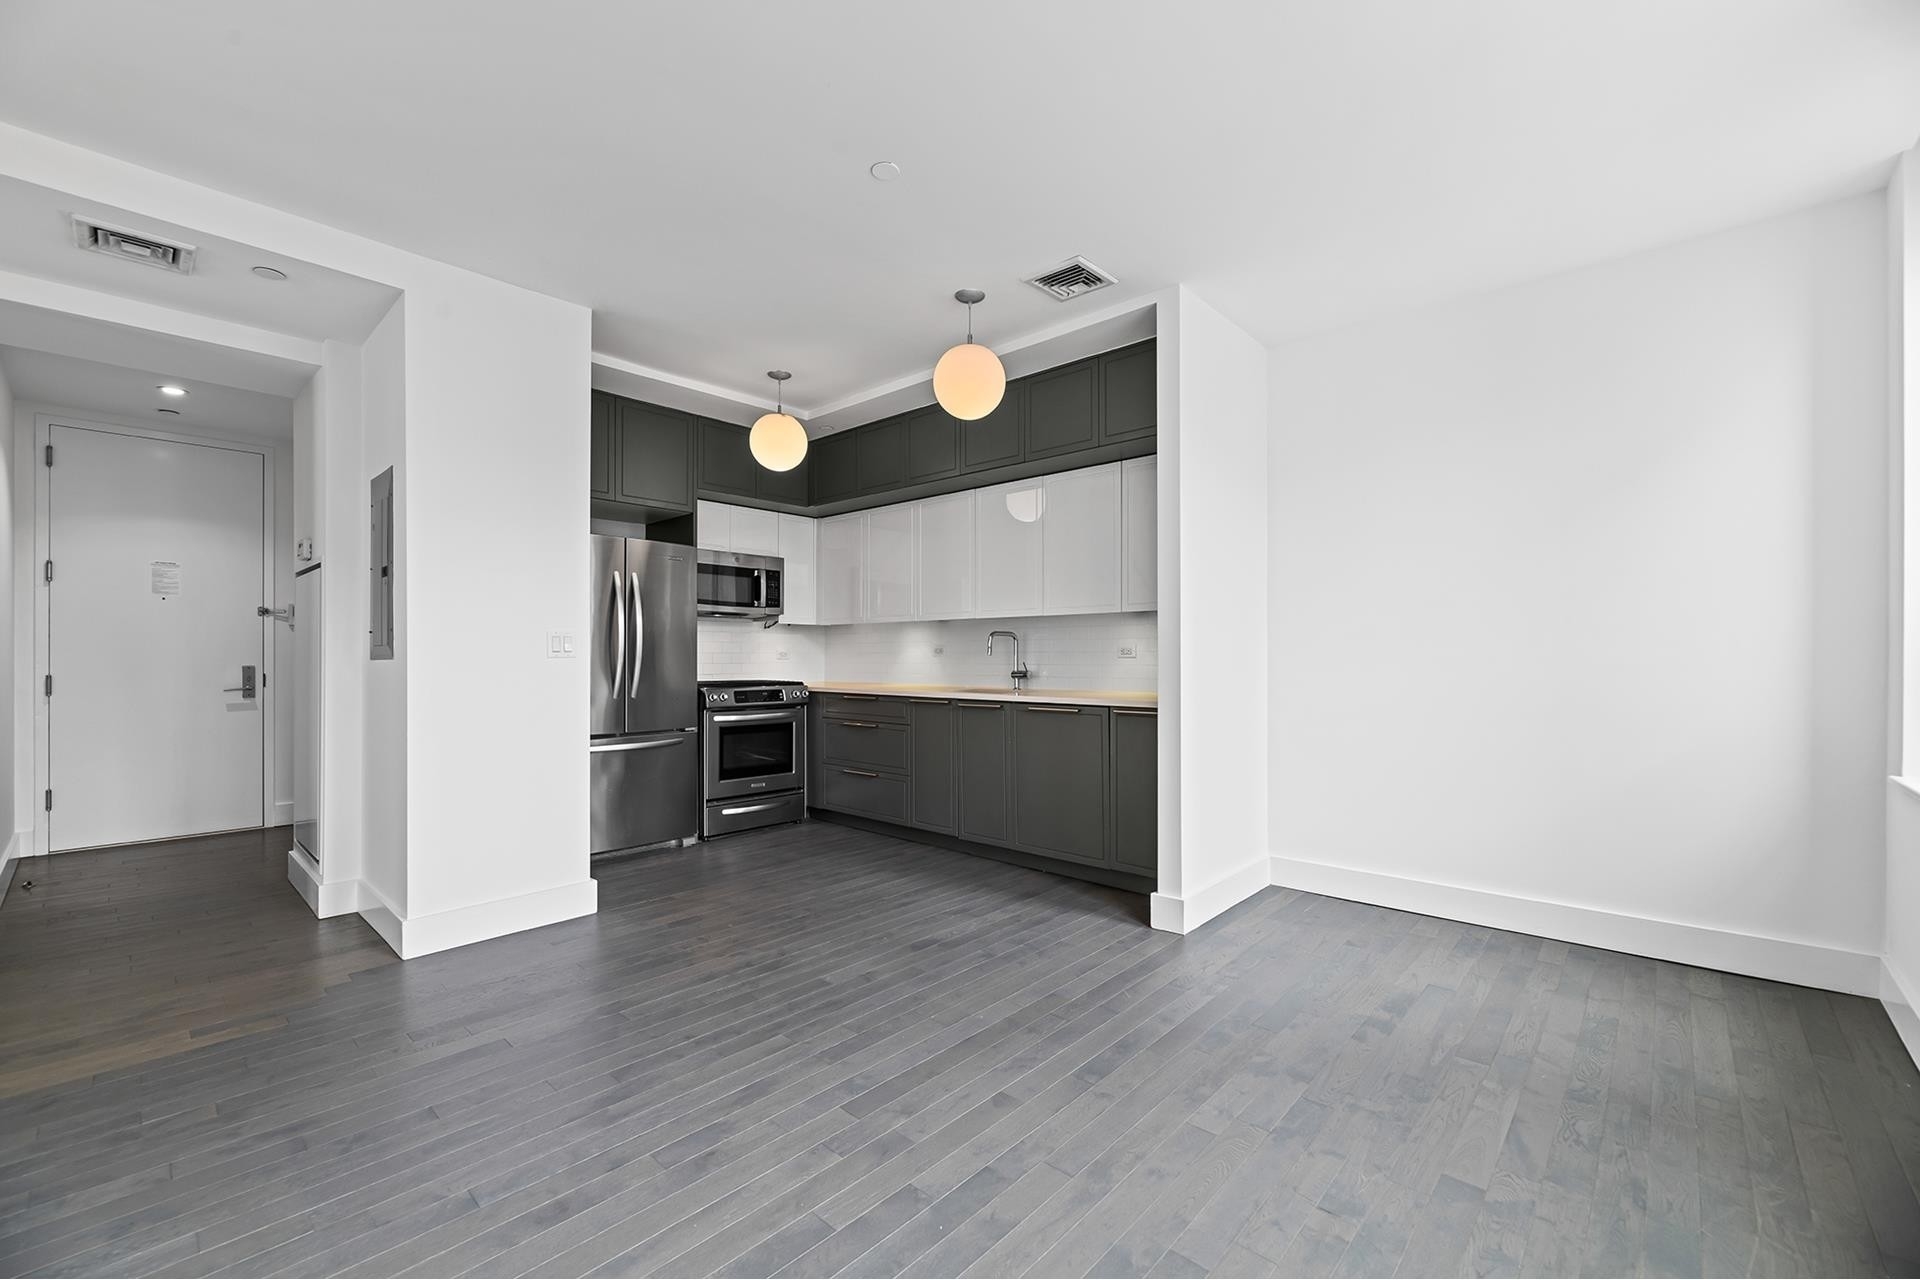 Condominium for Sale at Nine52, 416 W 52ND ST, 705 Hell's Kitchen, New York, New York 10019